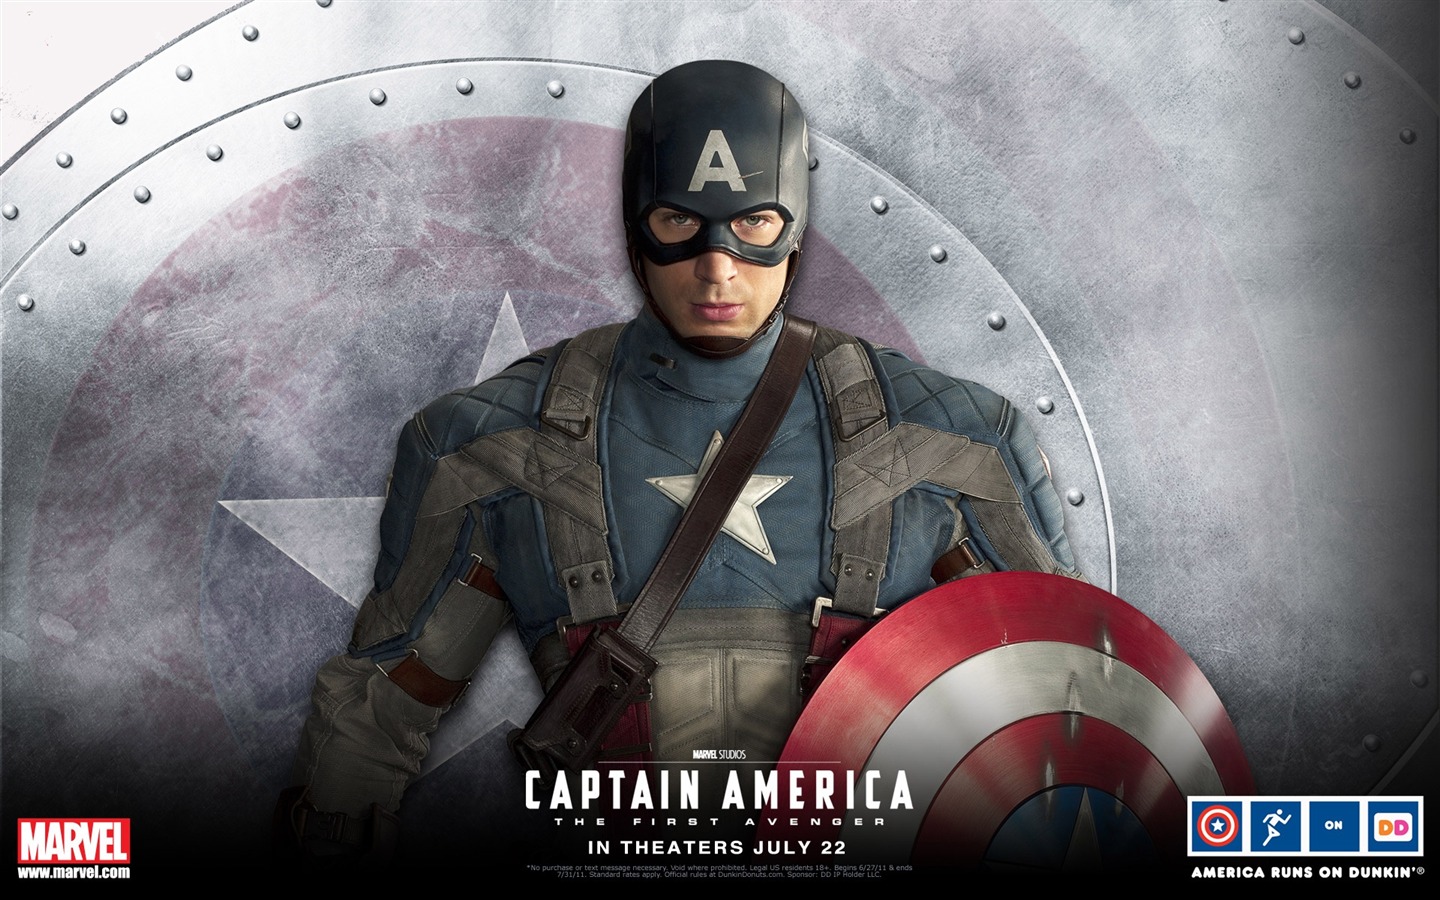 Captain America: The First Avenger wallpapers HD #4 - 1440x900